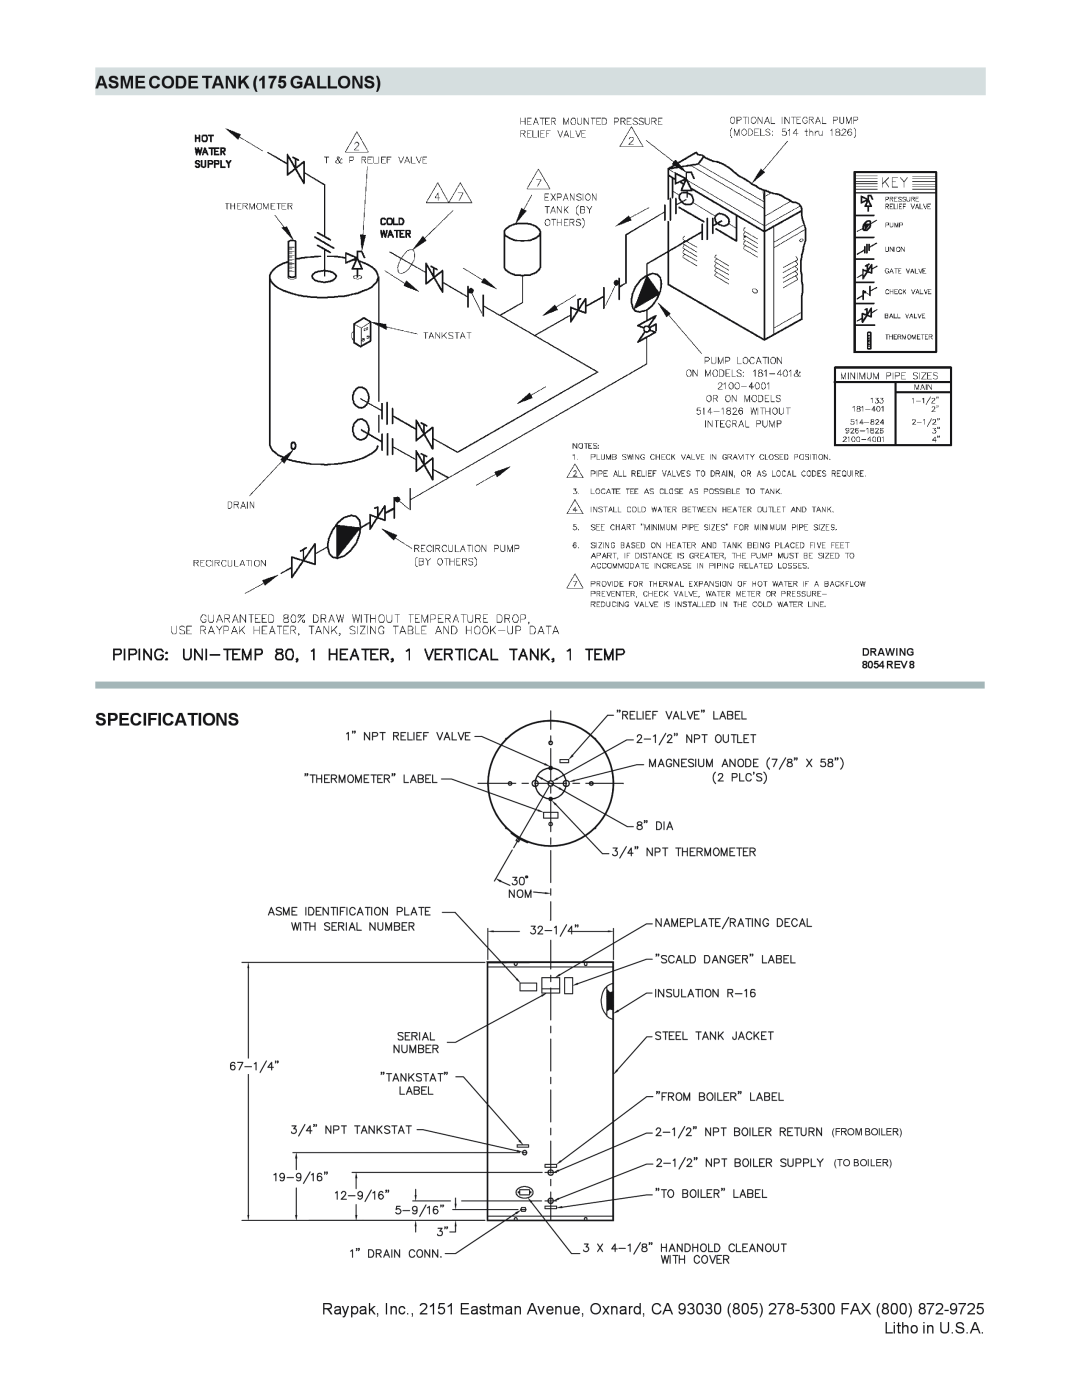 Raypak warranty ASME CODE TANK 175 GALLONS, Specifications, DRAWING 8054REV8, From Boiler To Boiler 